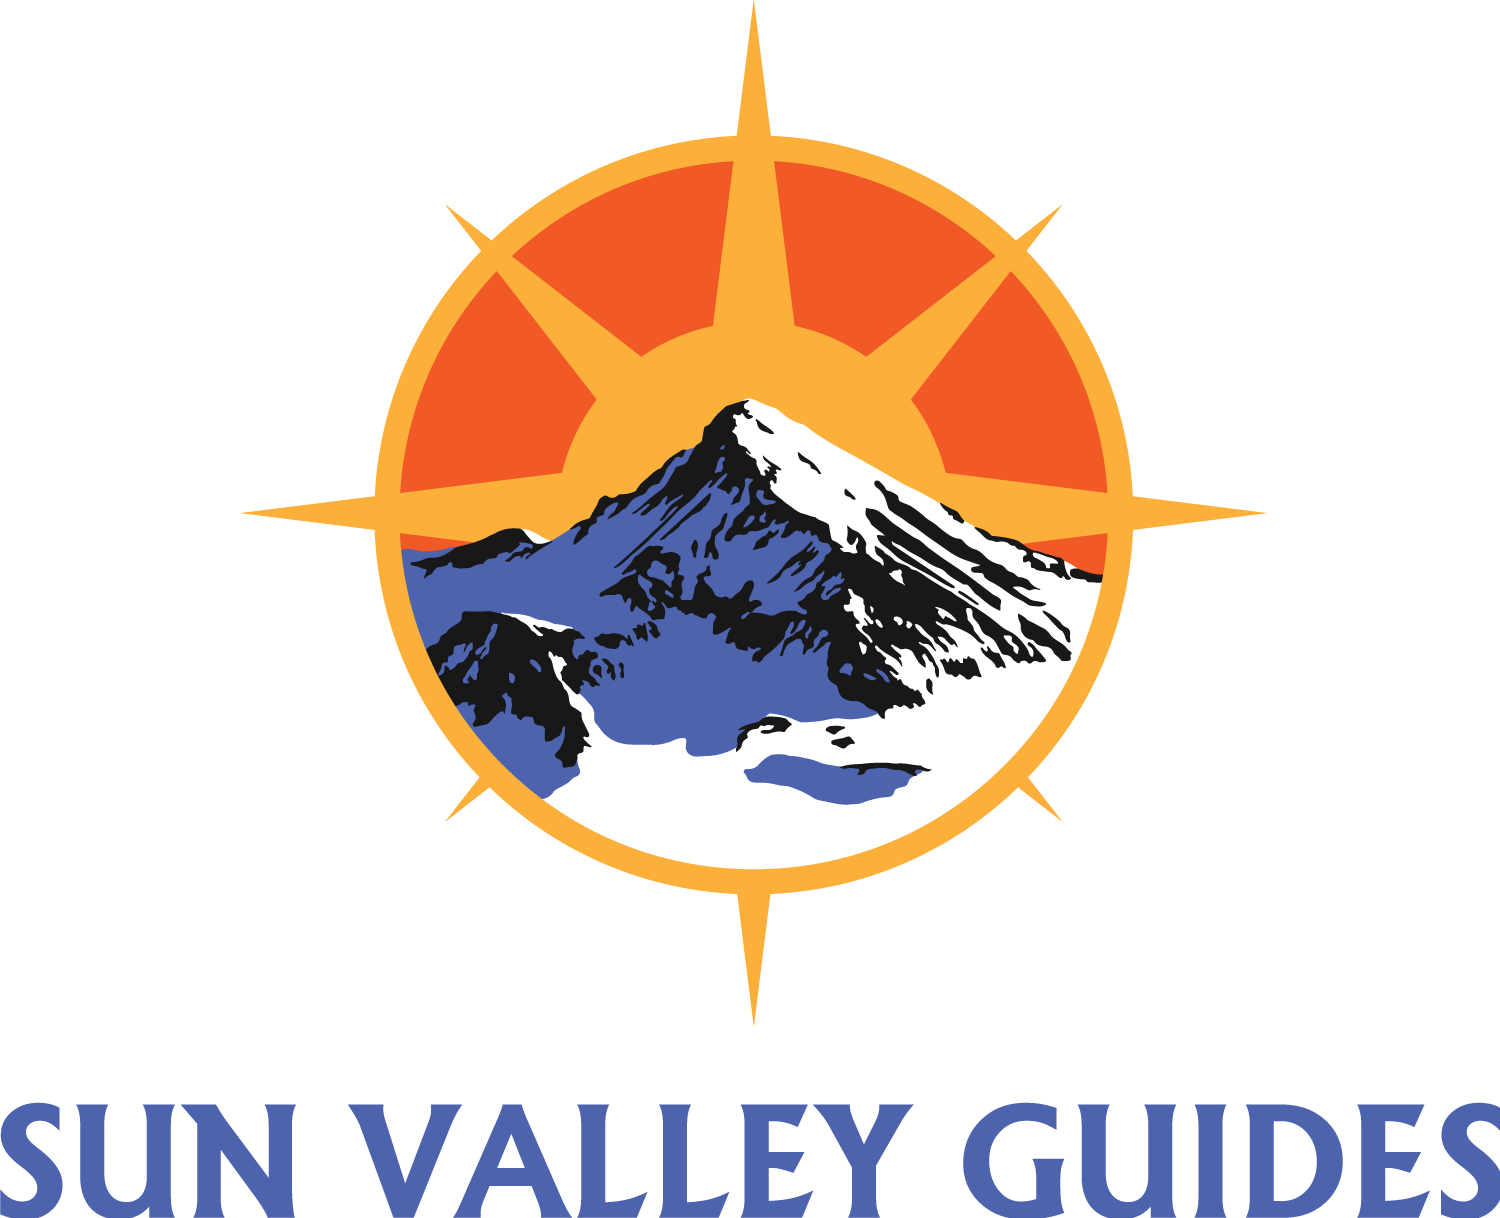 Sun Valley Guides